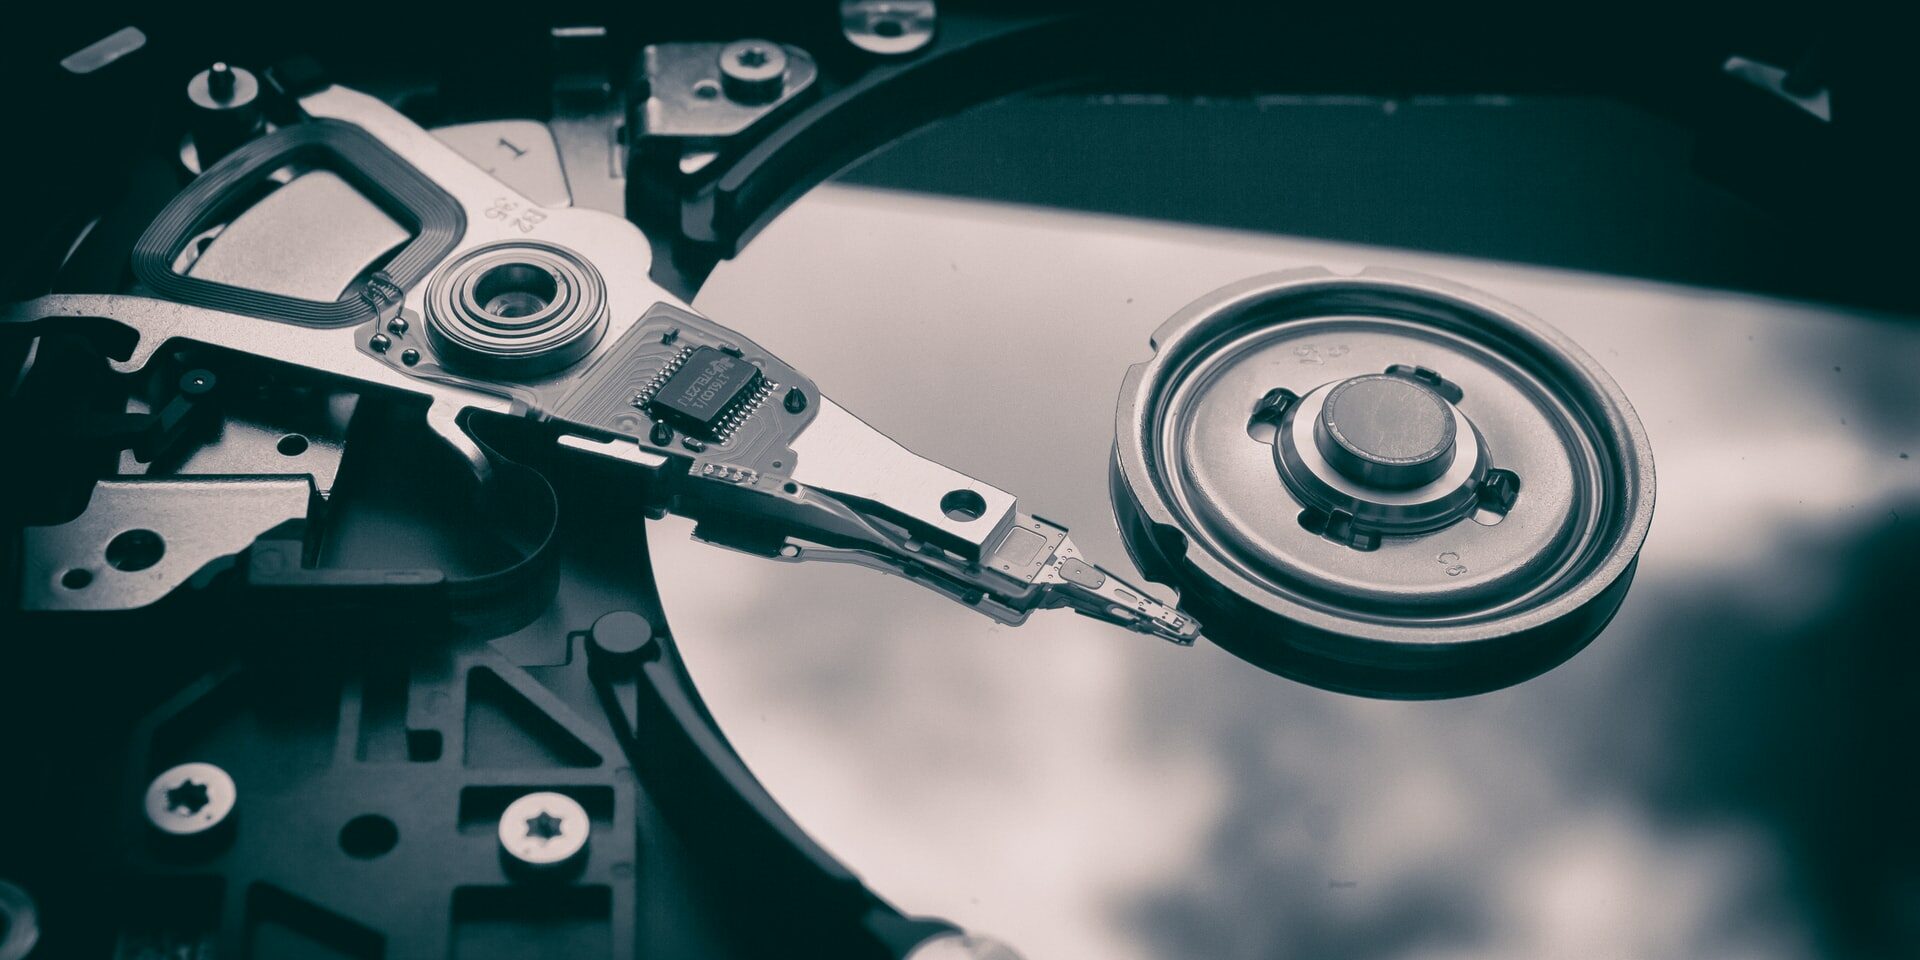 Open hard drive in close view